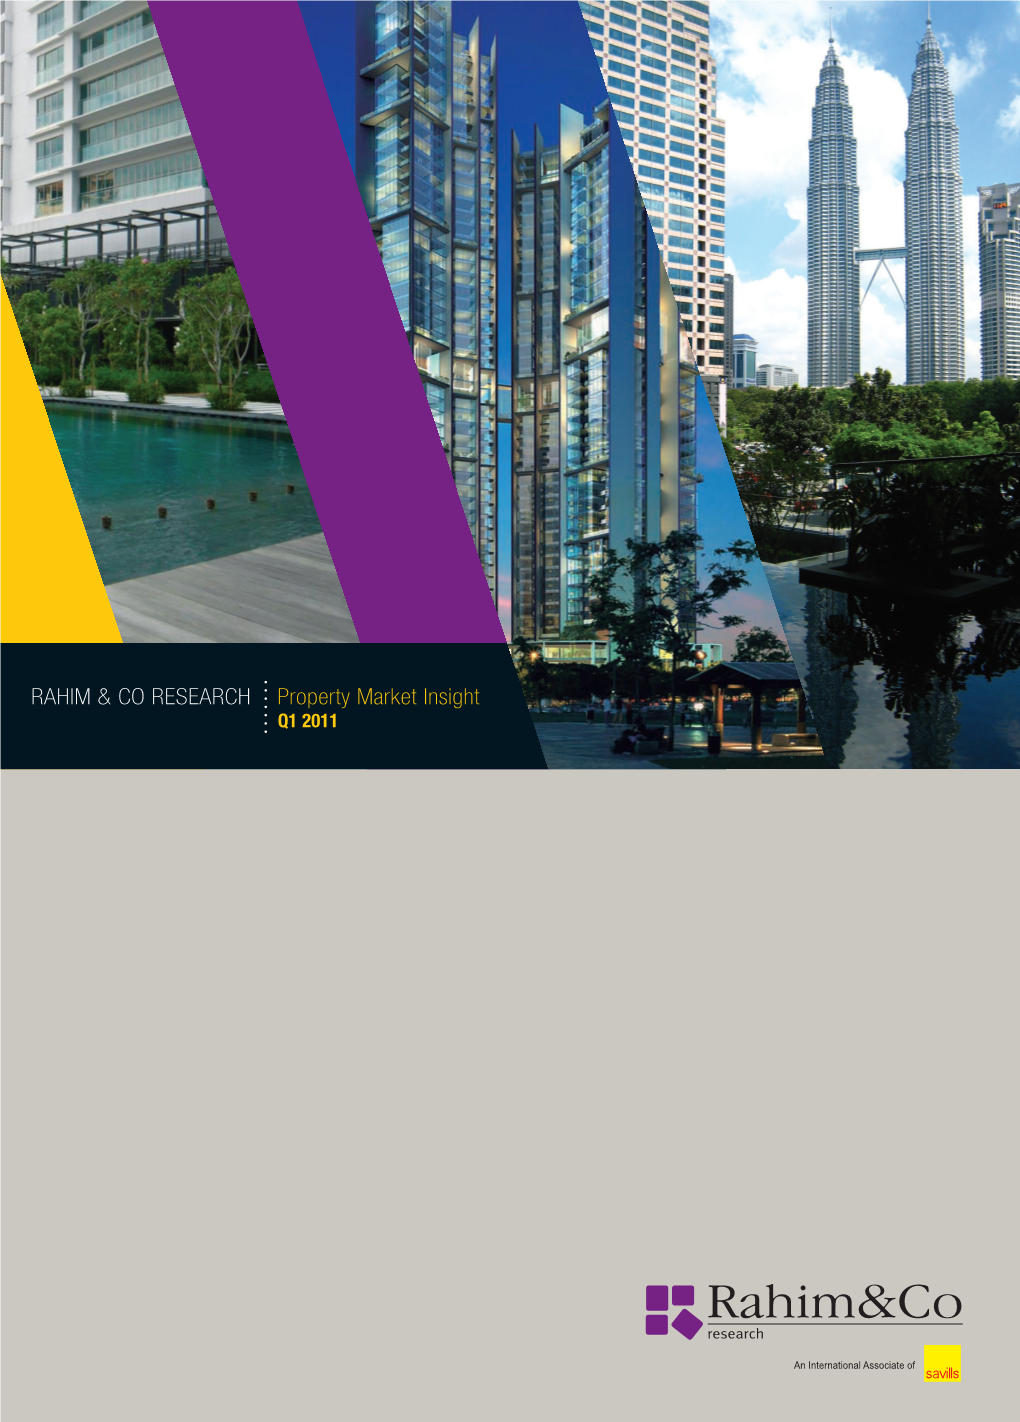 Rahim & Co Research Property Market Insight Q1 2011 Download